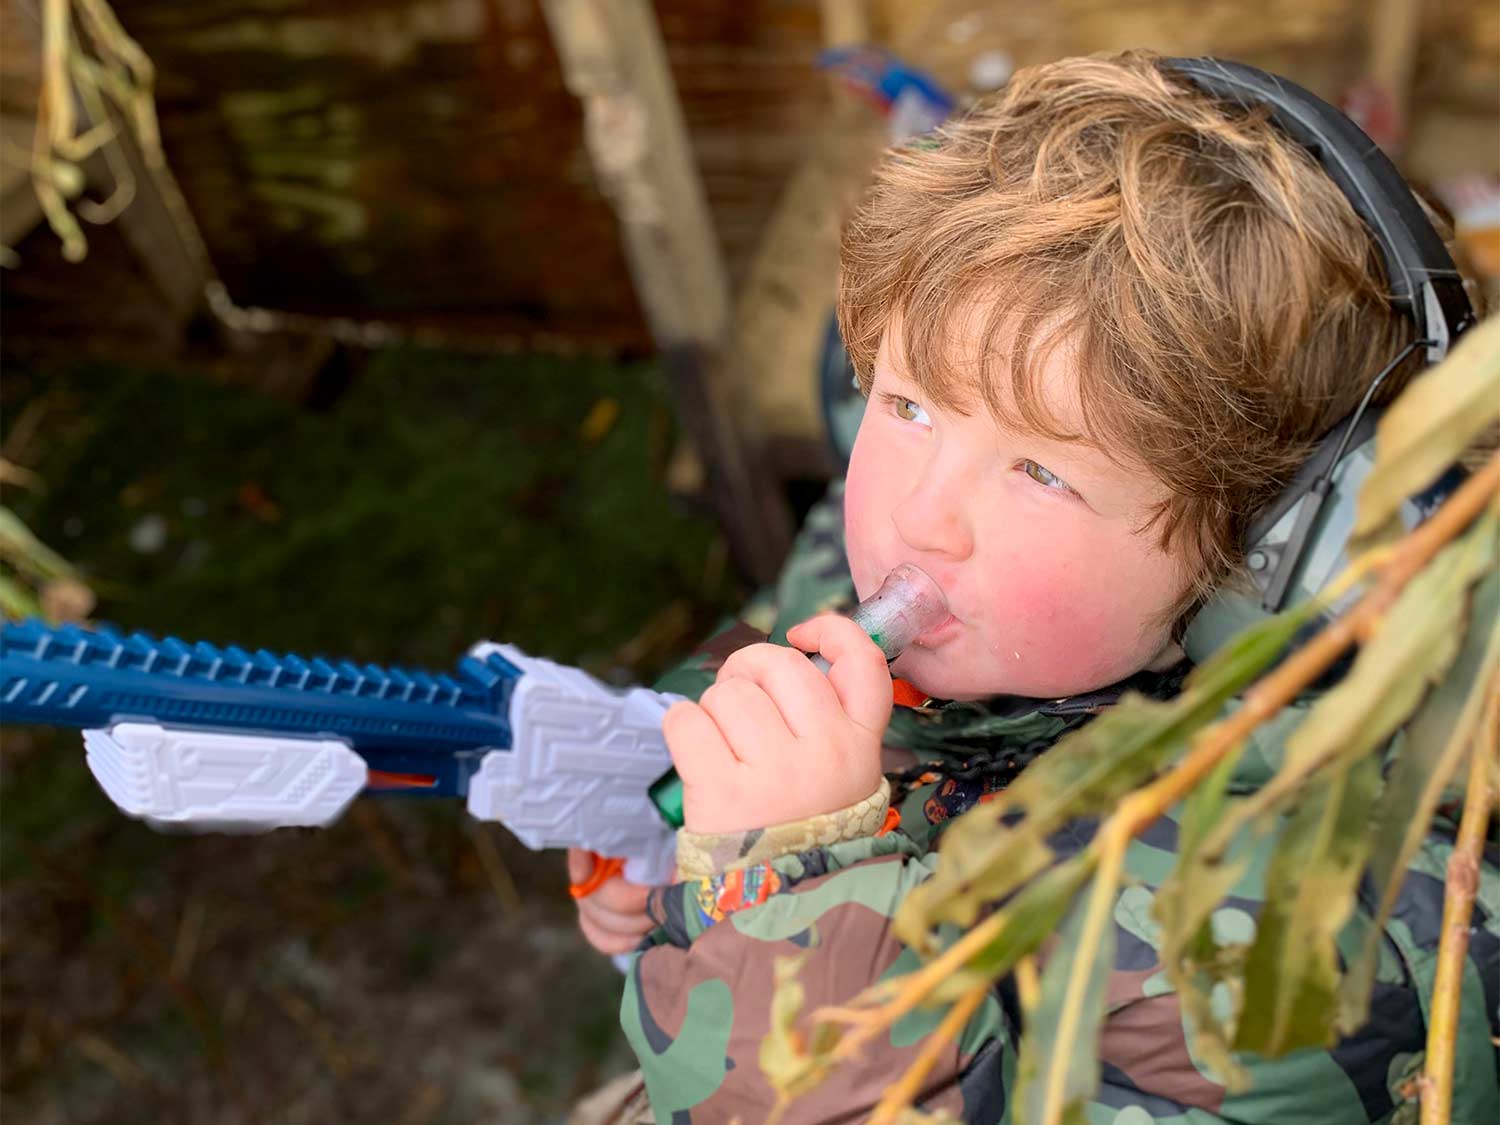 A young kid blows on a duck call while holding a toy gun.